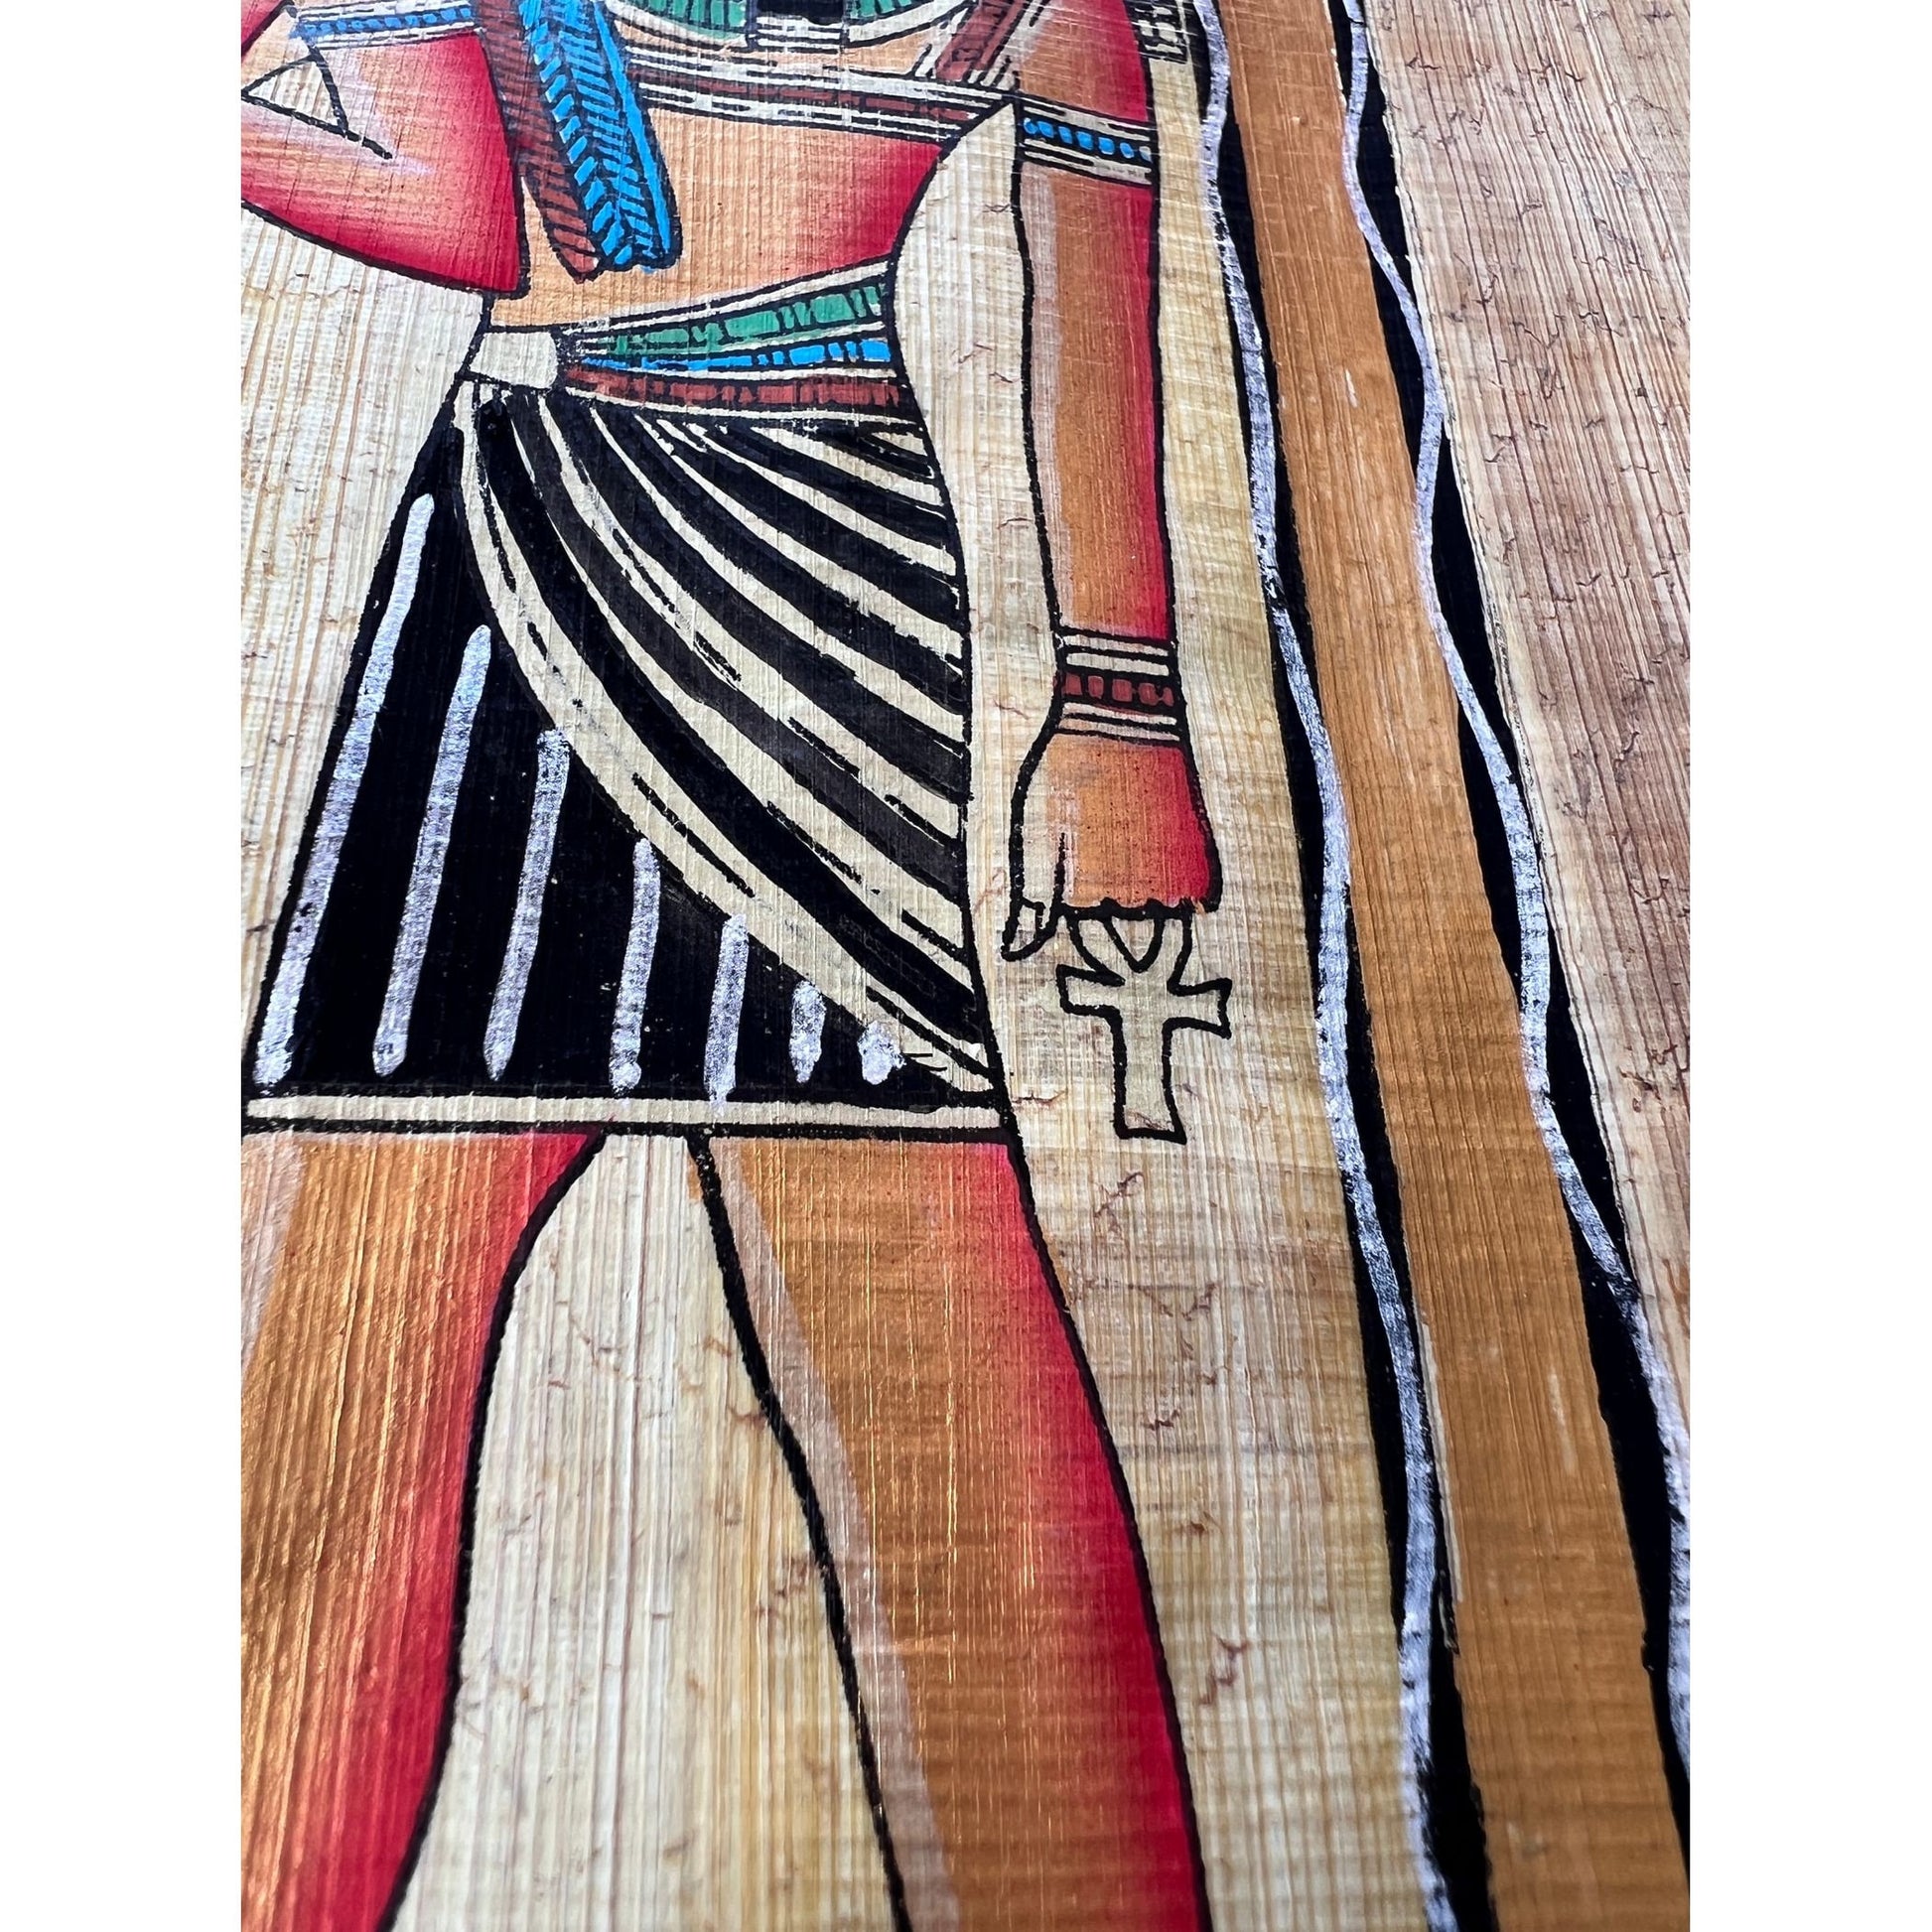 Osiris Lord of Gods, Pharaoh and God Horus Ancient Egyptian Genuine Hand Painted Papyrus Painting Art, 13x17 Inches